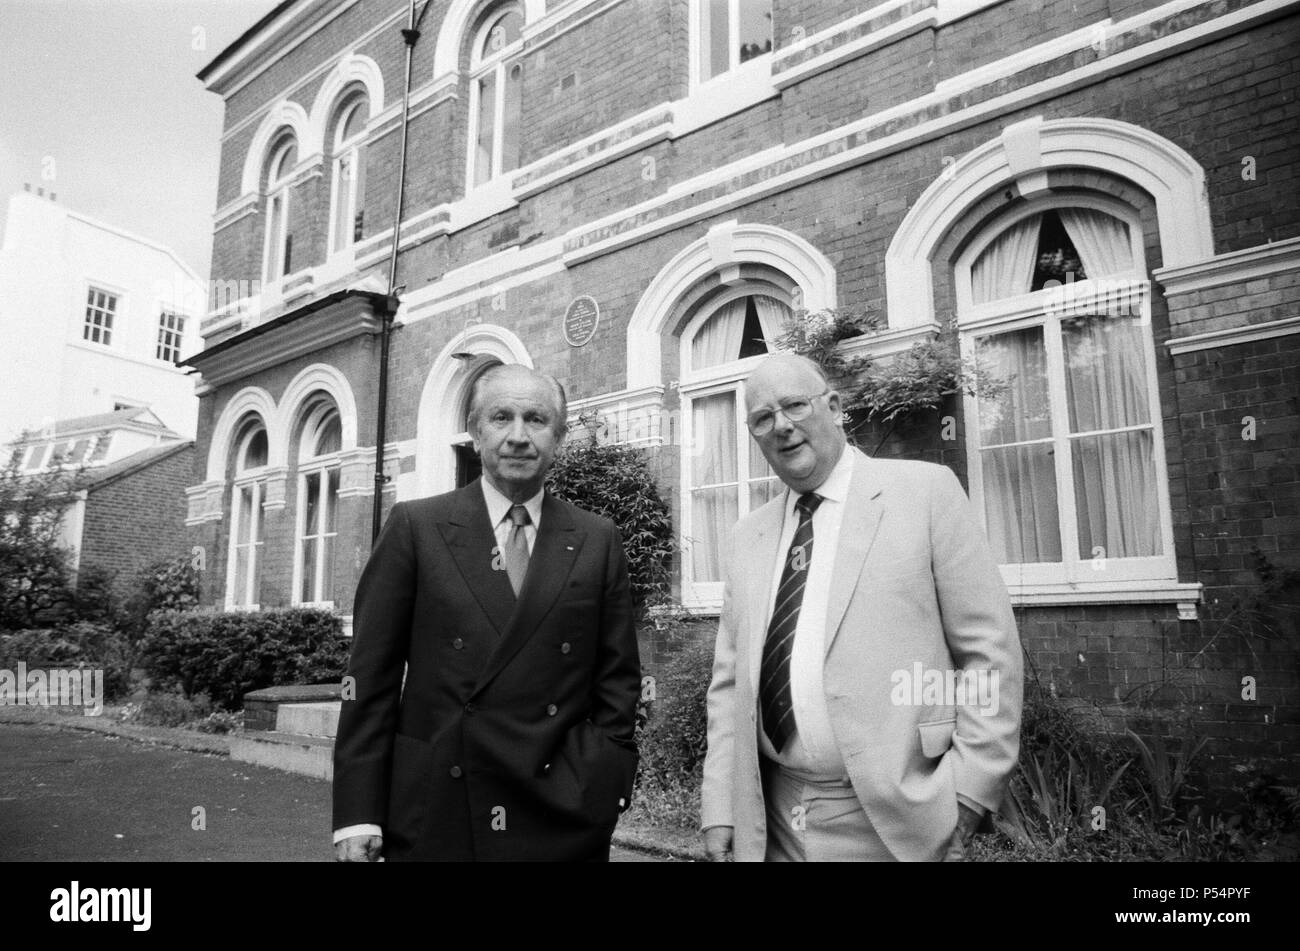 On the left, Juan Antonio Samaranch, President of the International Olympic Committee with Denis Howell, at No. 8 Ampton Road, Edgbaston, the home of lawn tennis. Juan Antonio Samaranch, pledged that Birmingham would get a fair deal when the choice would be made for hosting the Olympic Games in 1992. 7th July 1986. Stock Photo